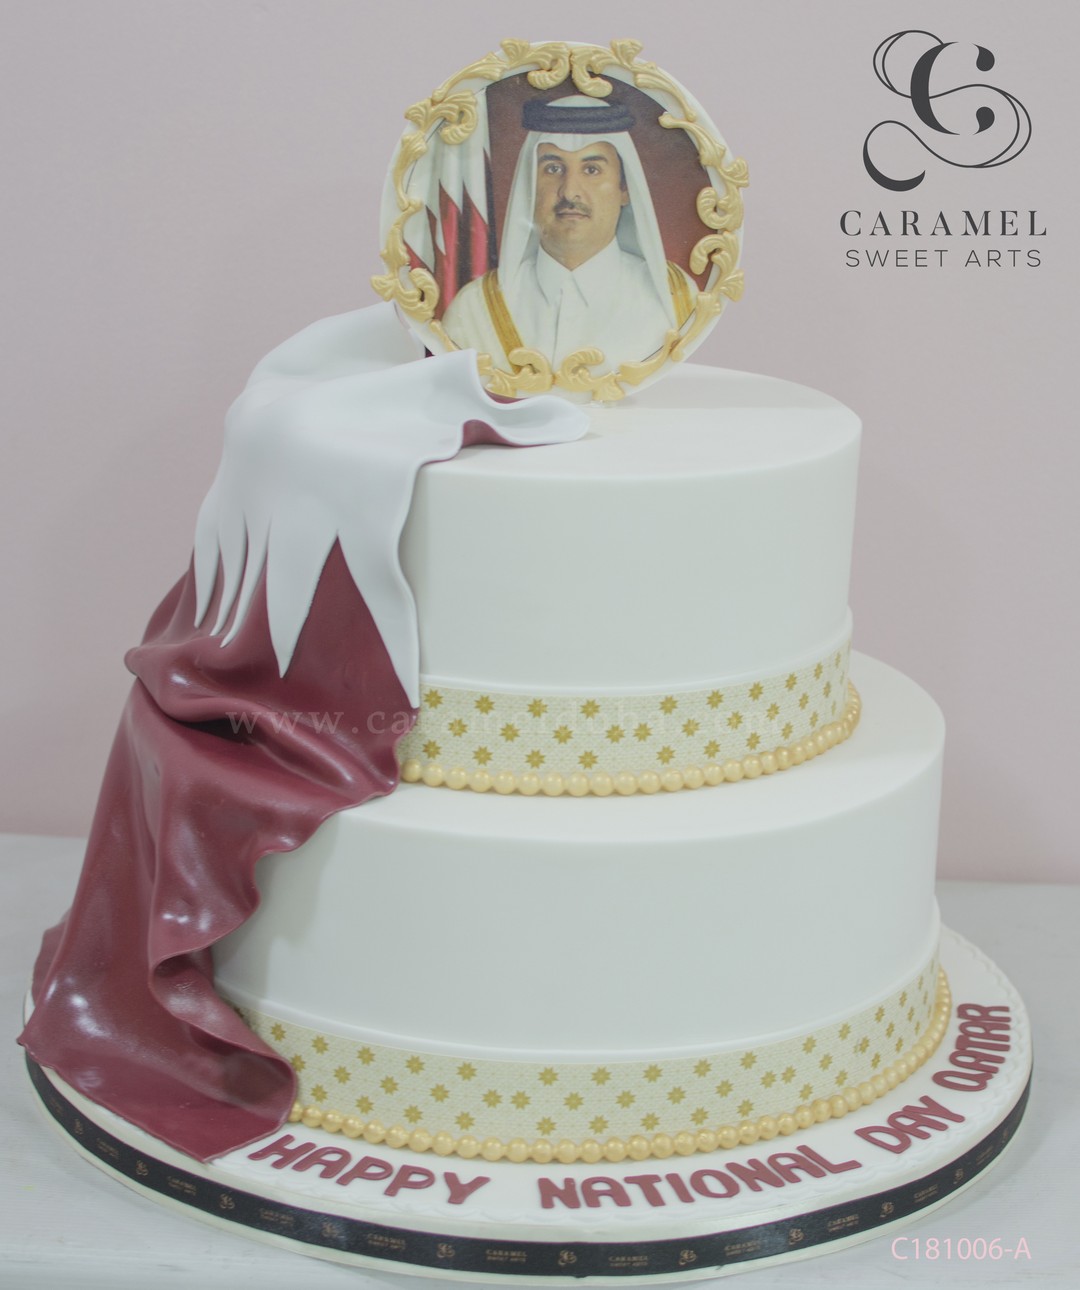 Cake Delivery in Qatar | Send Cake to Qatar - FNP AE